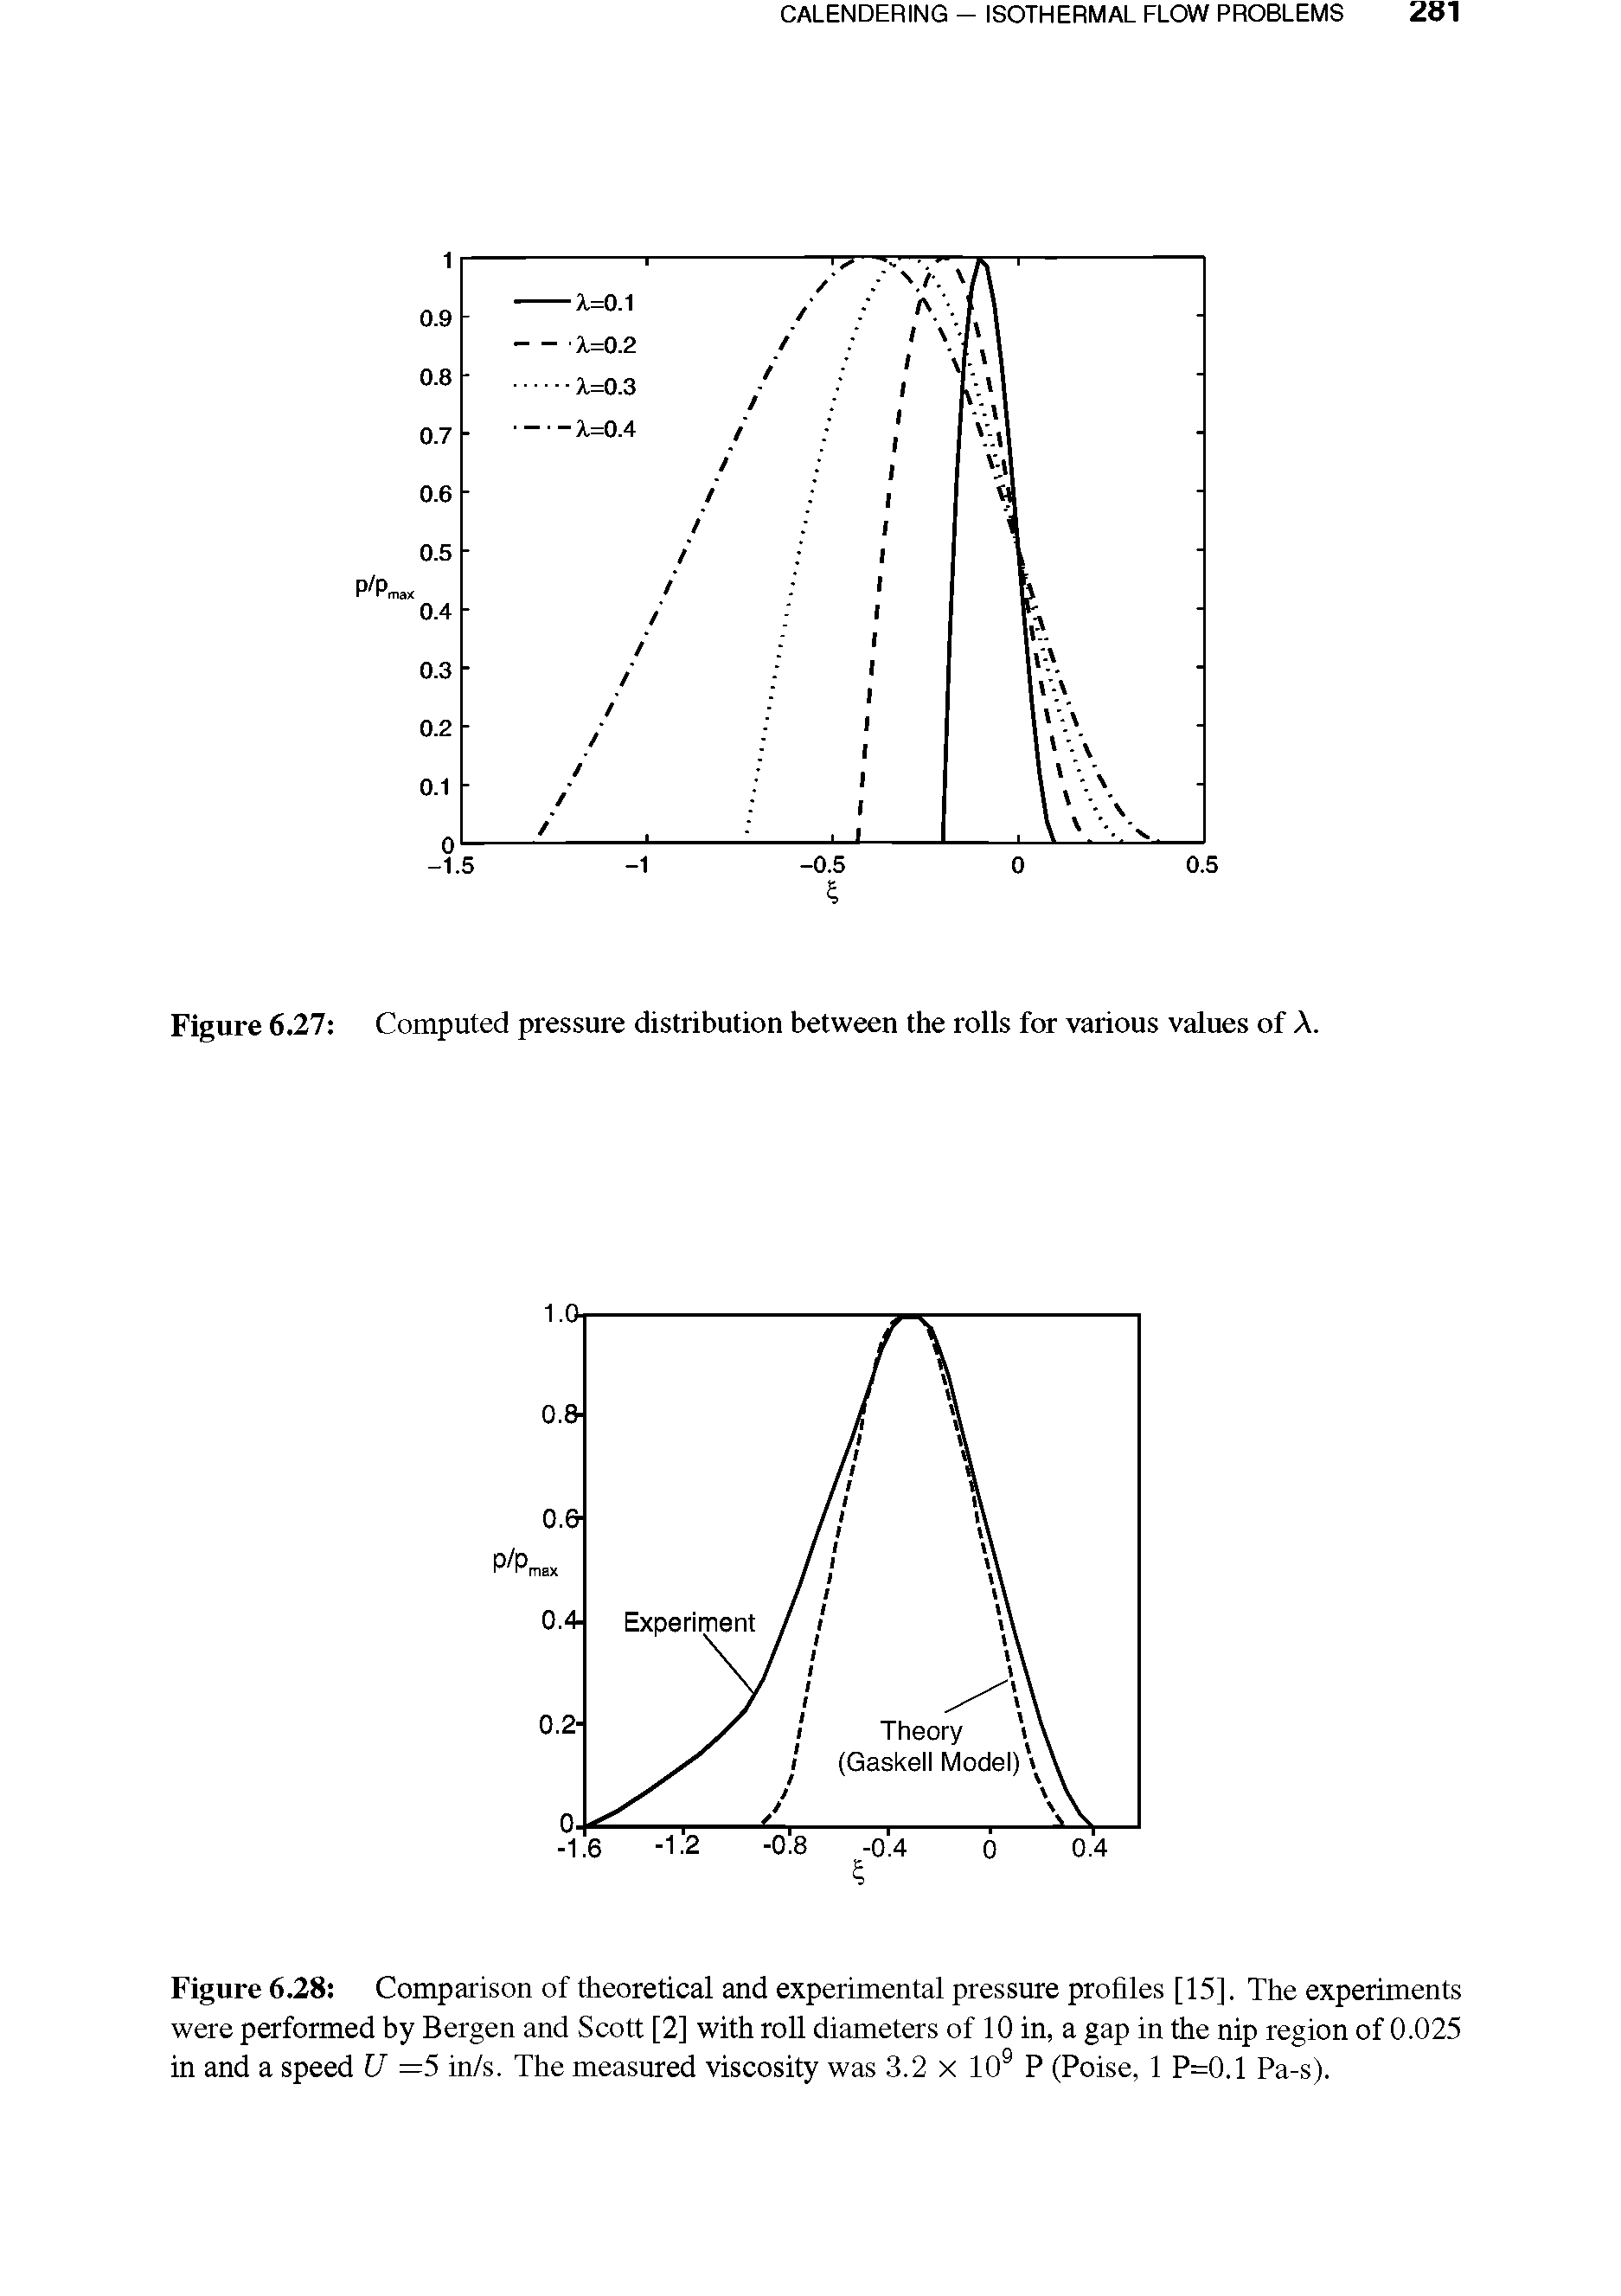 Figure 6.28 Comparison of theoretical and experimental pressure profiles [15], The experiments were performed by Bergen and Scott [2] with roll diameters of 10 in, a gap in the nip region of 0.025 in and a speed U =5 in/s. The measured viscosity was 3.2 x 109 P (Poise, 1 P=0.1 Pa-s).